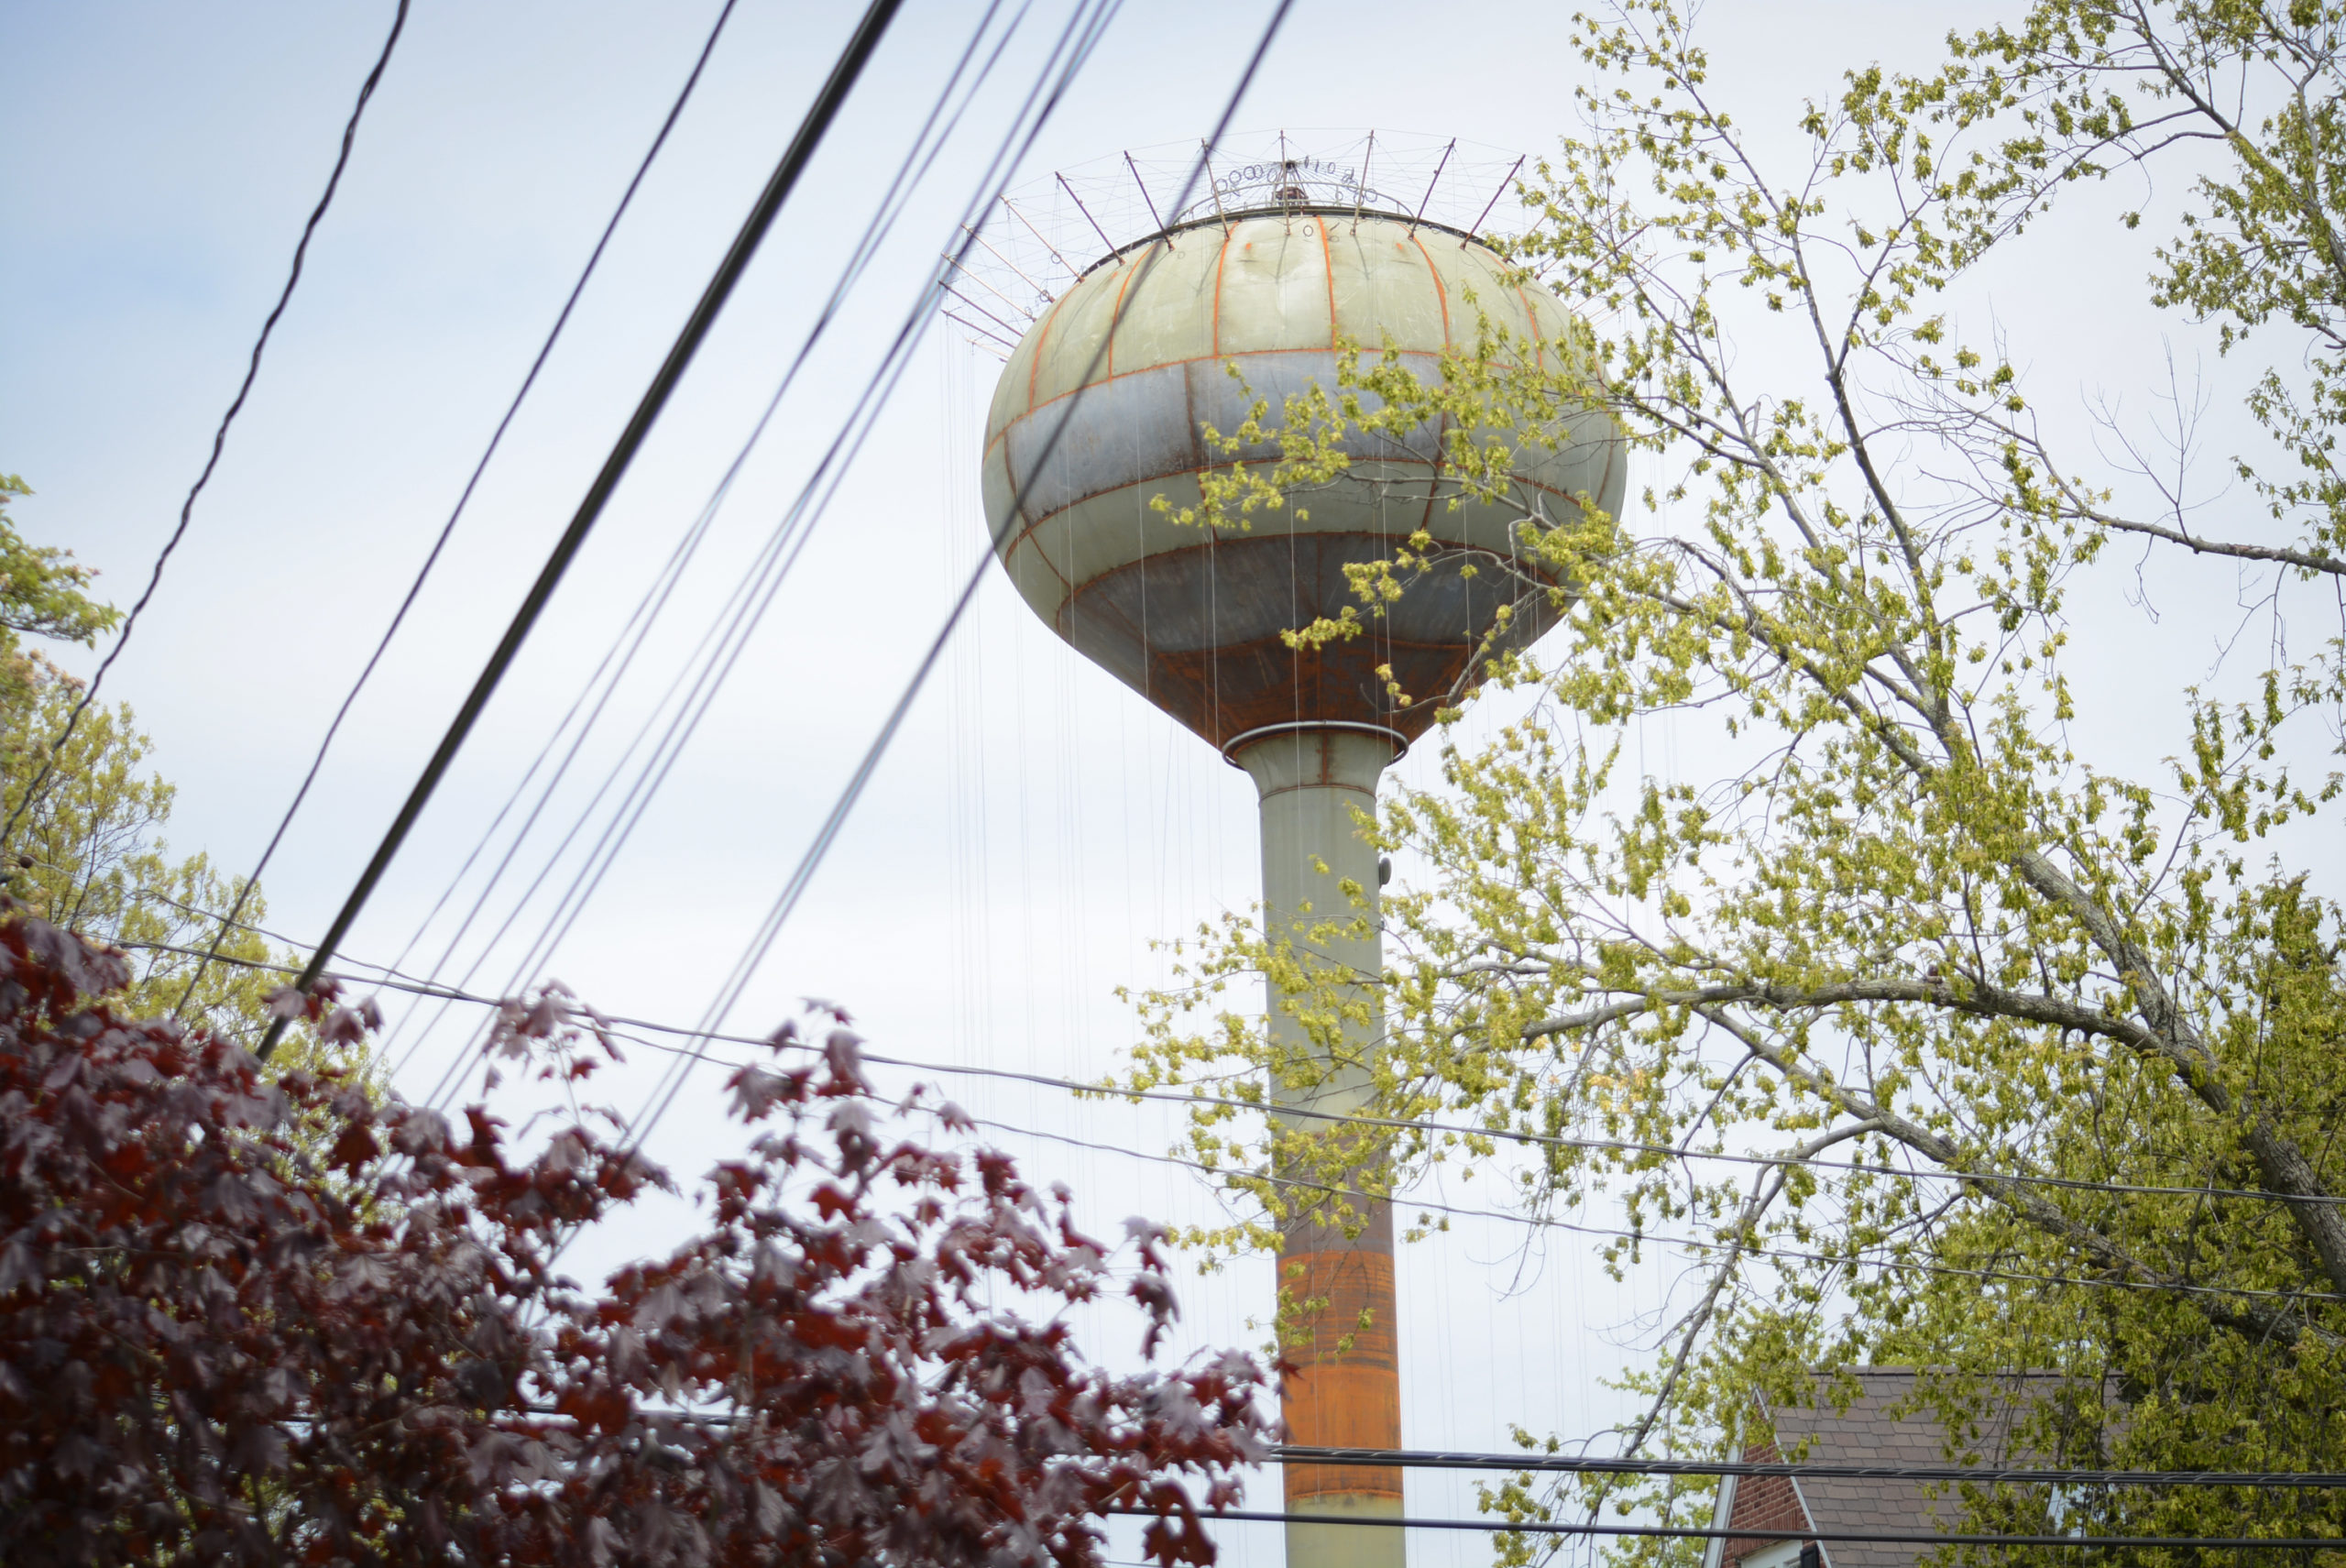 Final touches are being put on Williston Park's new water tower, which is expected to go online on June 1. (Photo by Janelle Clausen)